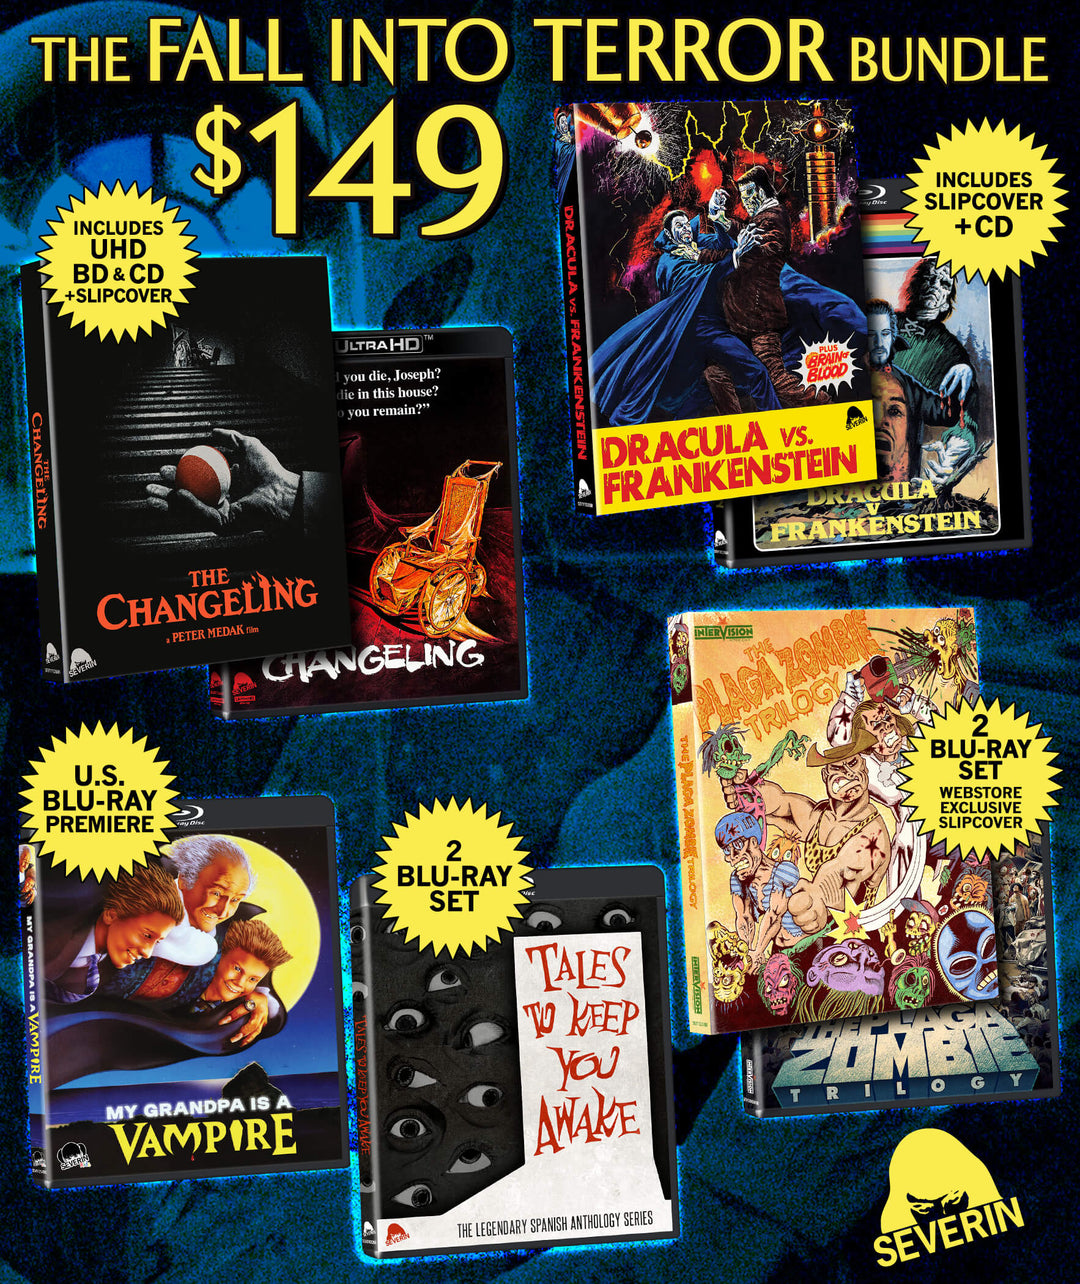 SEVERIN'S SEPTEMBER SLATE OFFERS A UHD UPGRADE OF THE CHANGELING AND MORE!